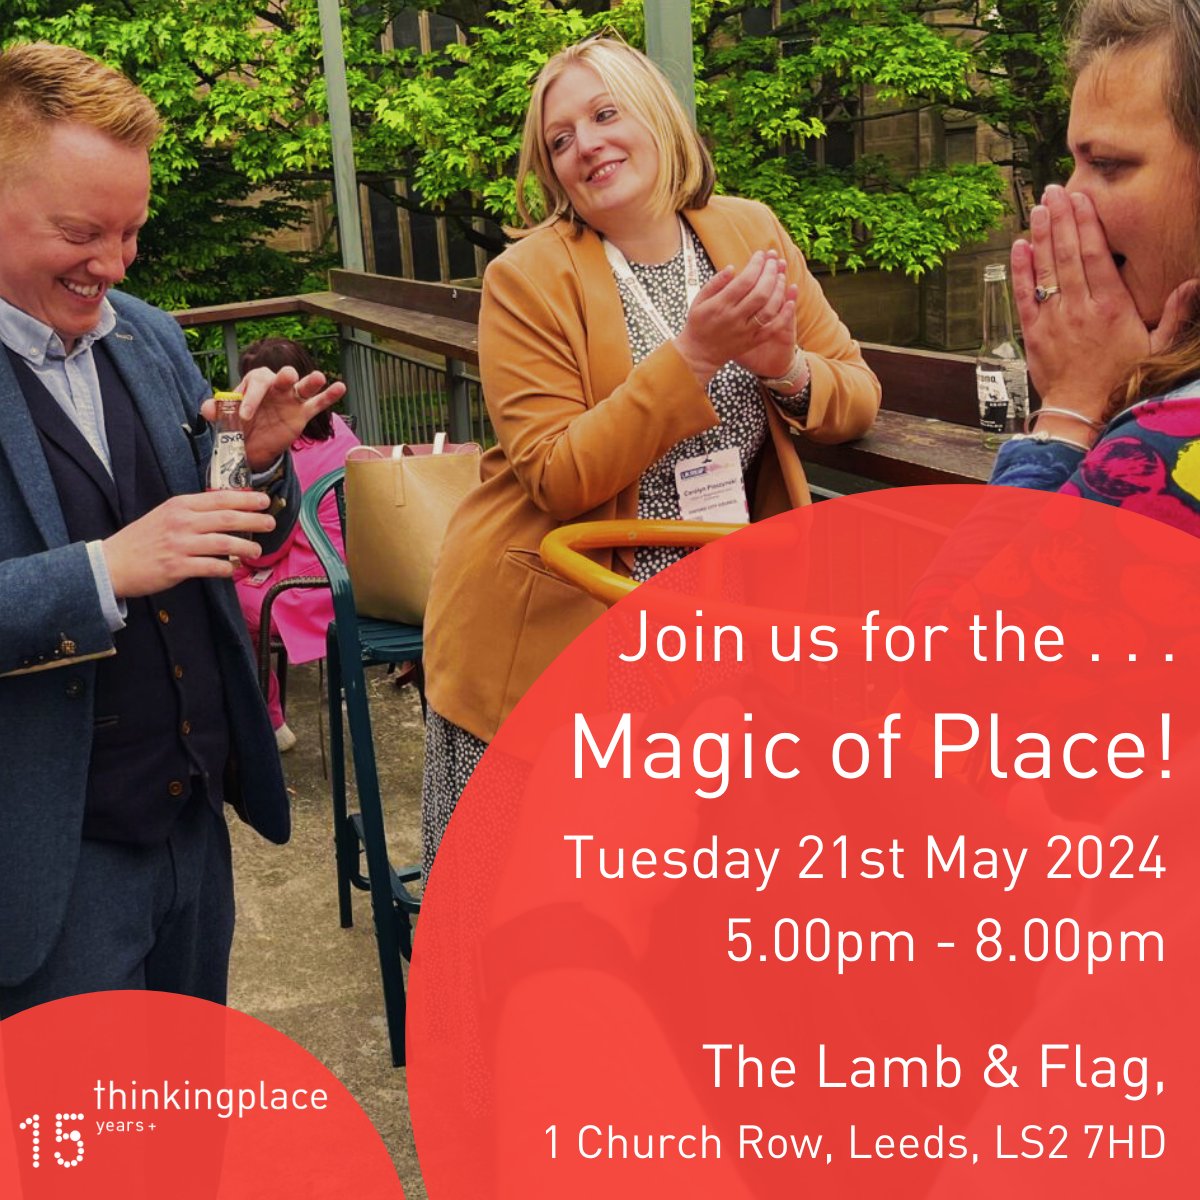 Will you be attending #UKREiiF this year? If so, you can meet with directors John & Sarah whilst there for an informal chat about your place & there's also the chance to chat, relax & enjoy magic at our drinks event on the Tuesday evening! Find out more: bit.ly/3IT5HvG